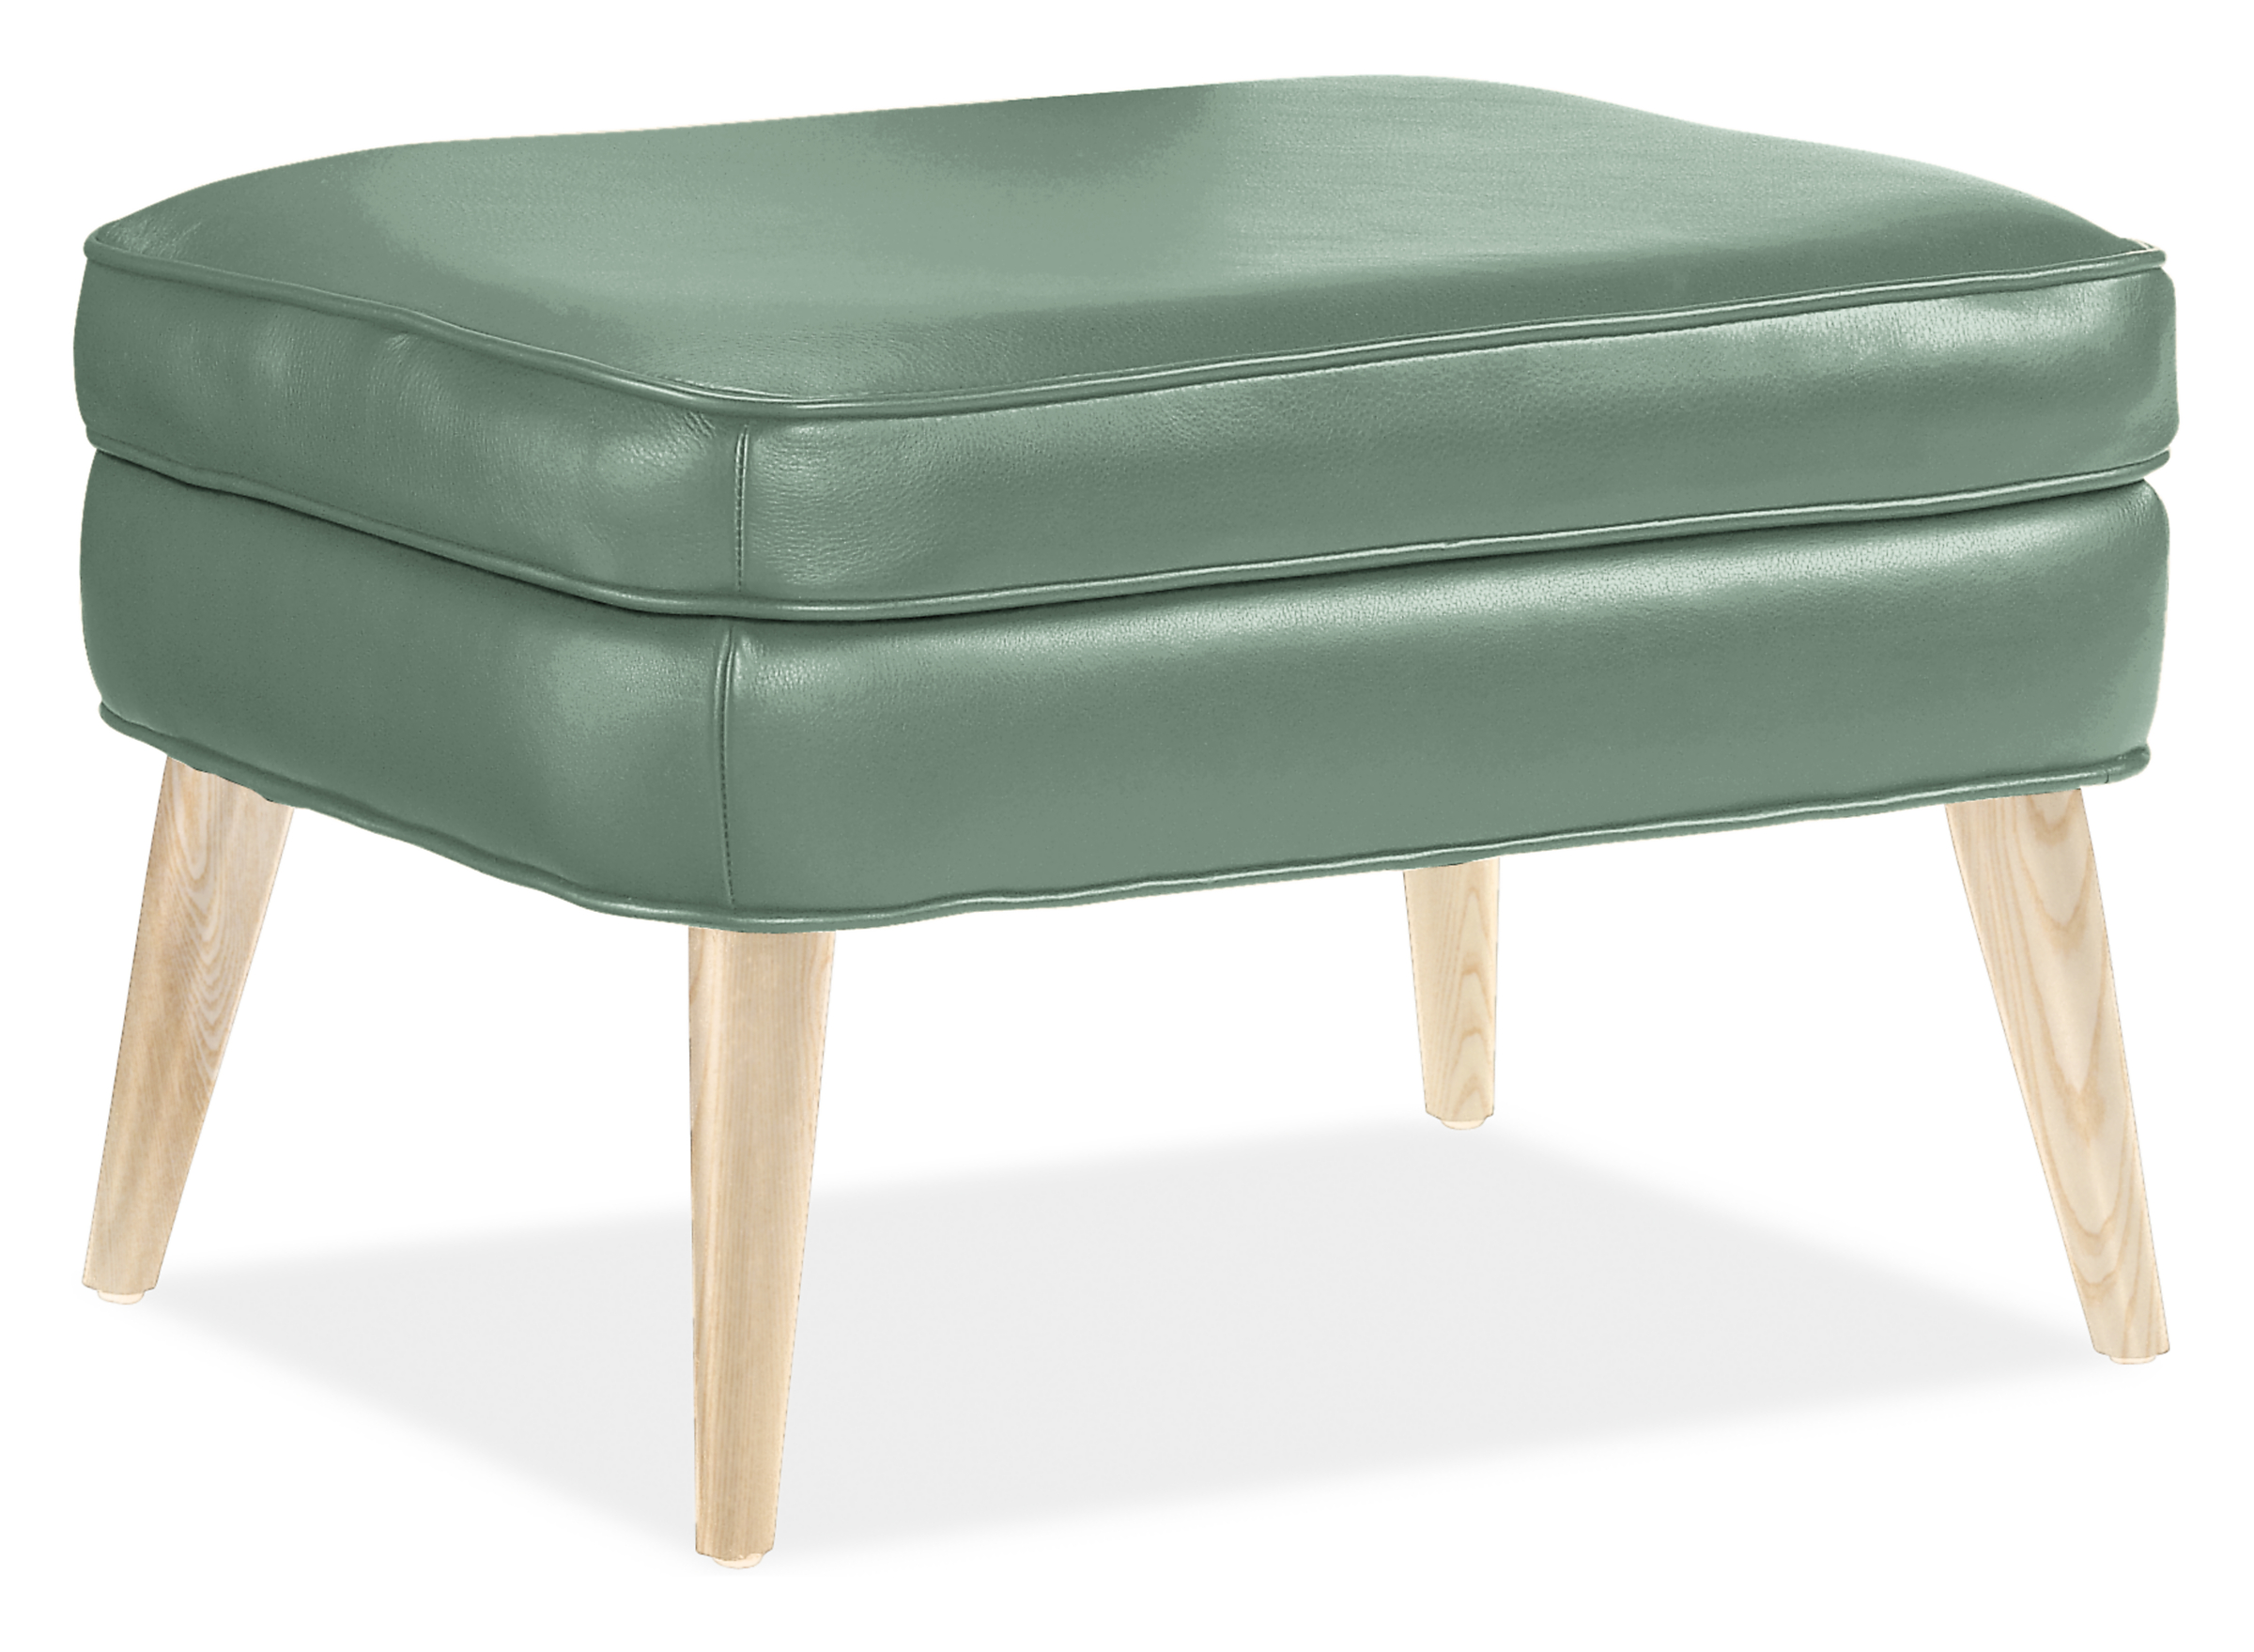 Quinn 26w 20d 16h Ottoman in Vento Teal Leather with Ash Legs